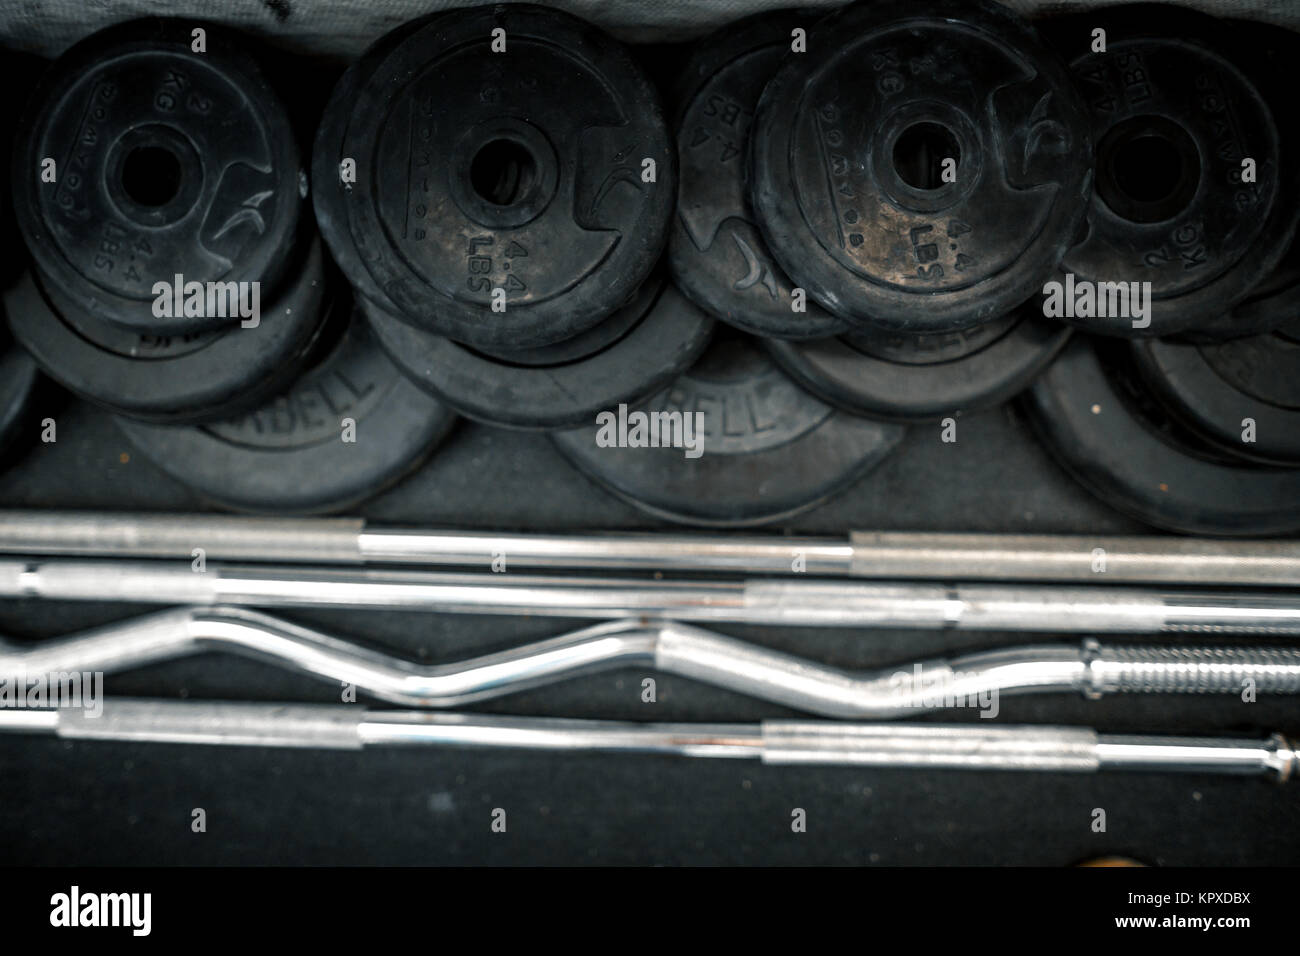 equipment for weightlifting: dumbbells and barbells Stock Photo